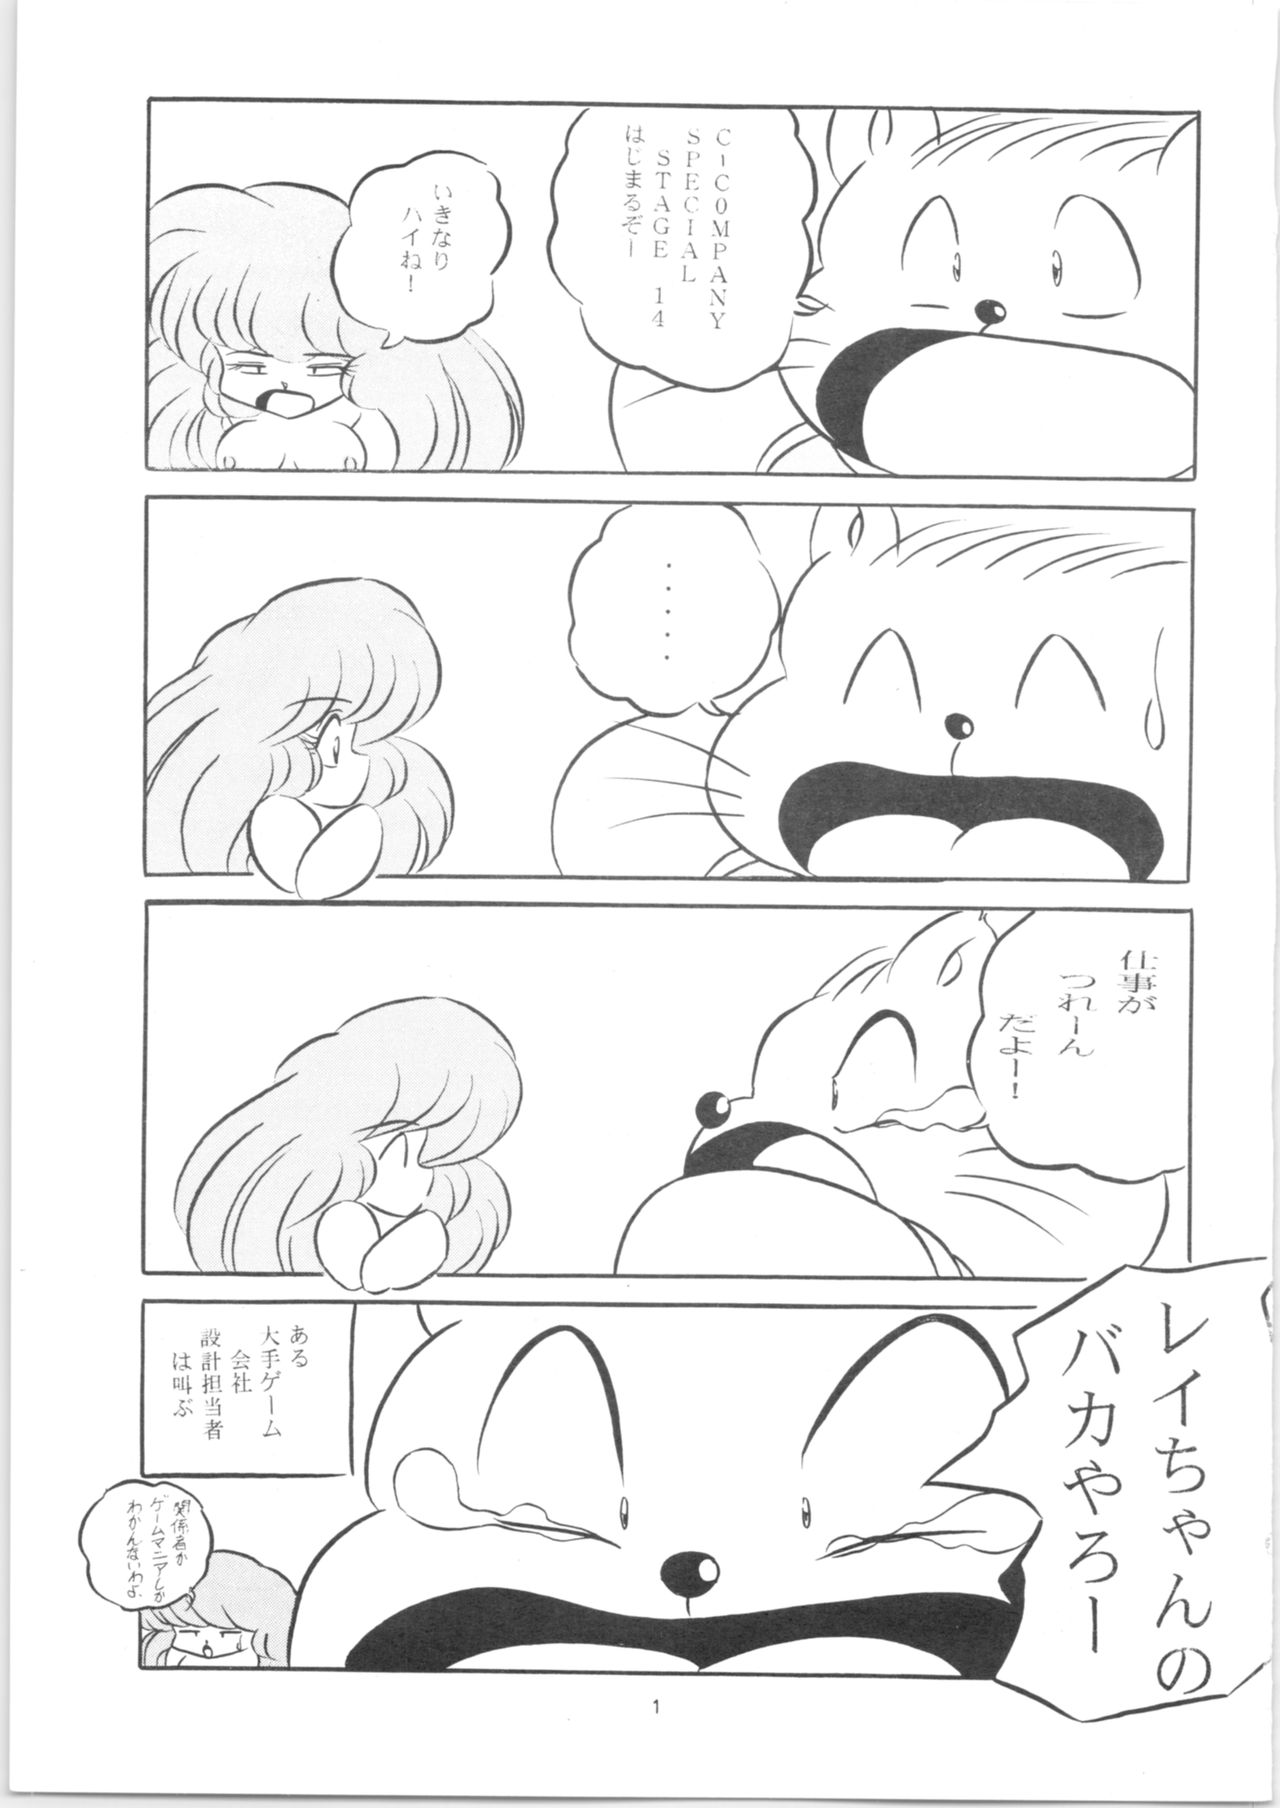 [C-COMPANY] C-COMPANY SPECIAL STAGE 14 (Ranma 1/2) page 2 full